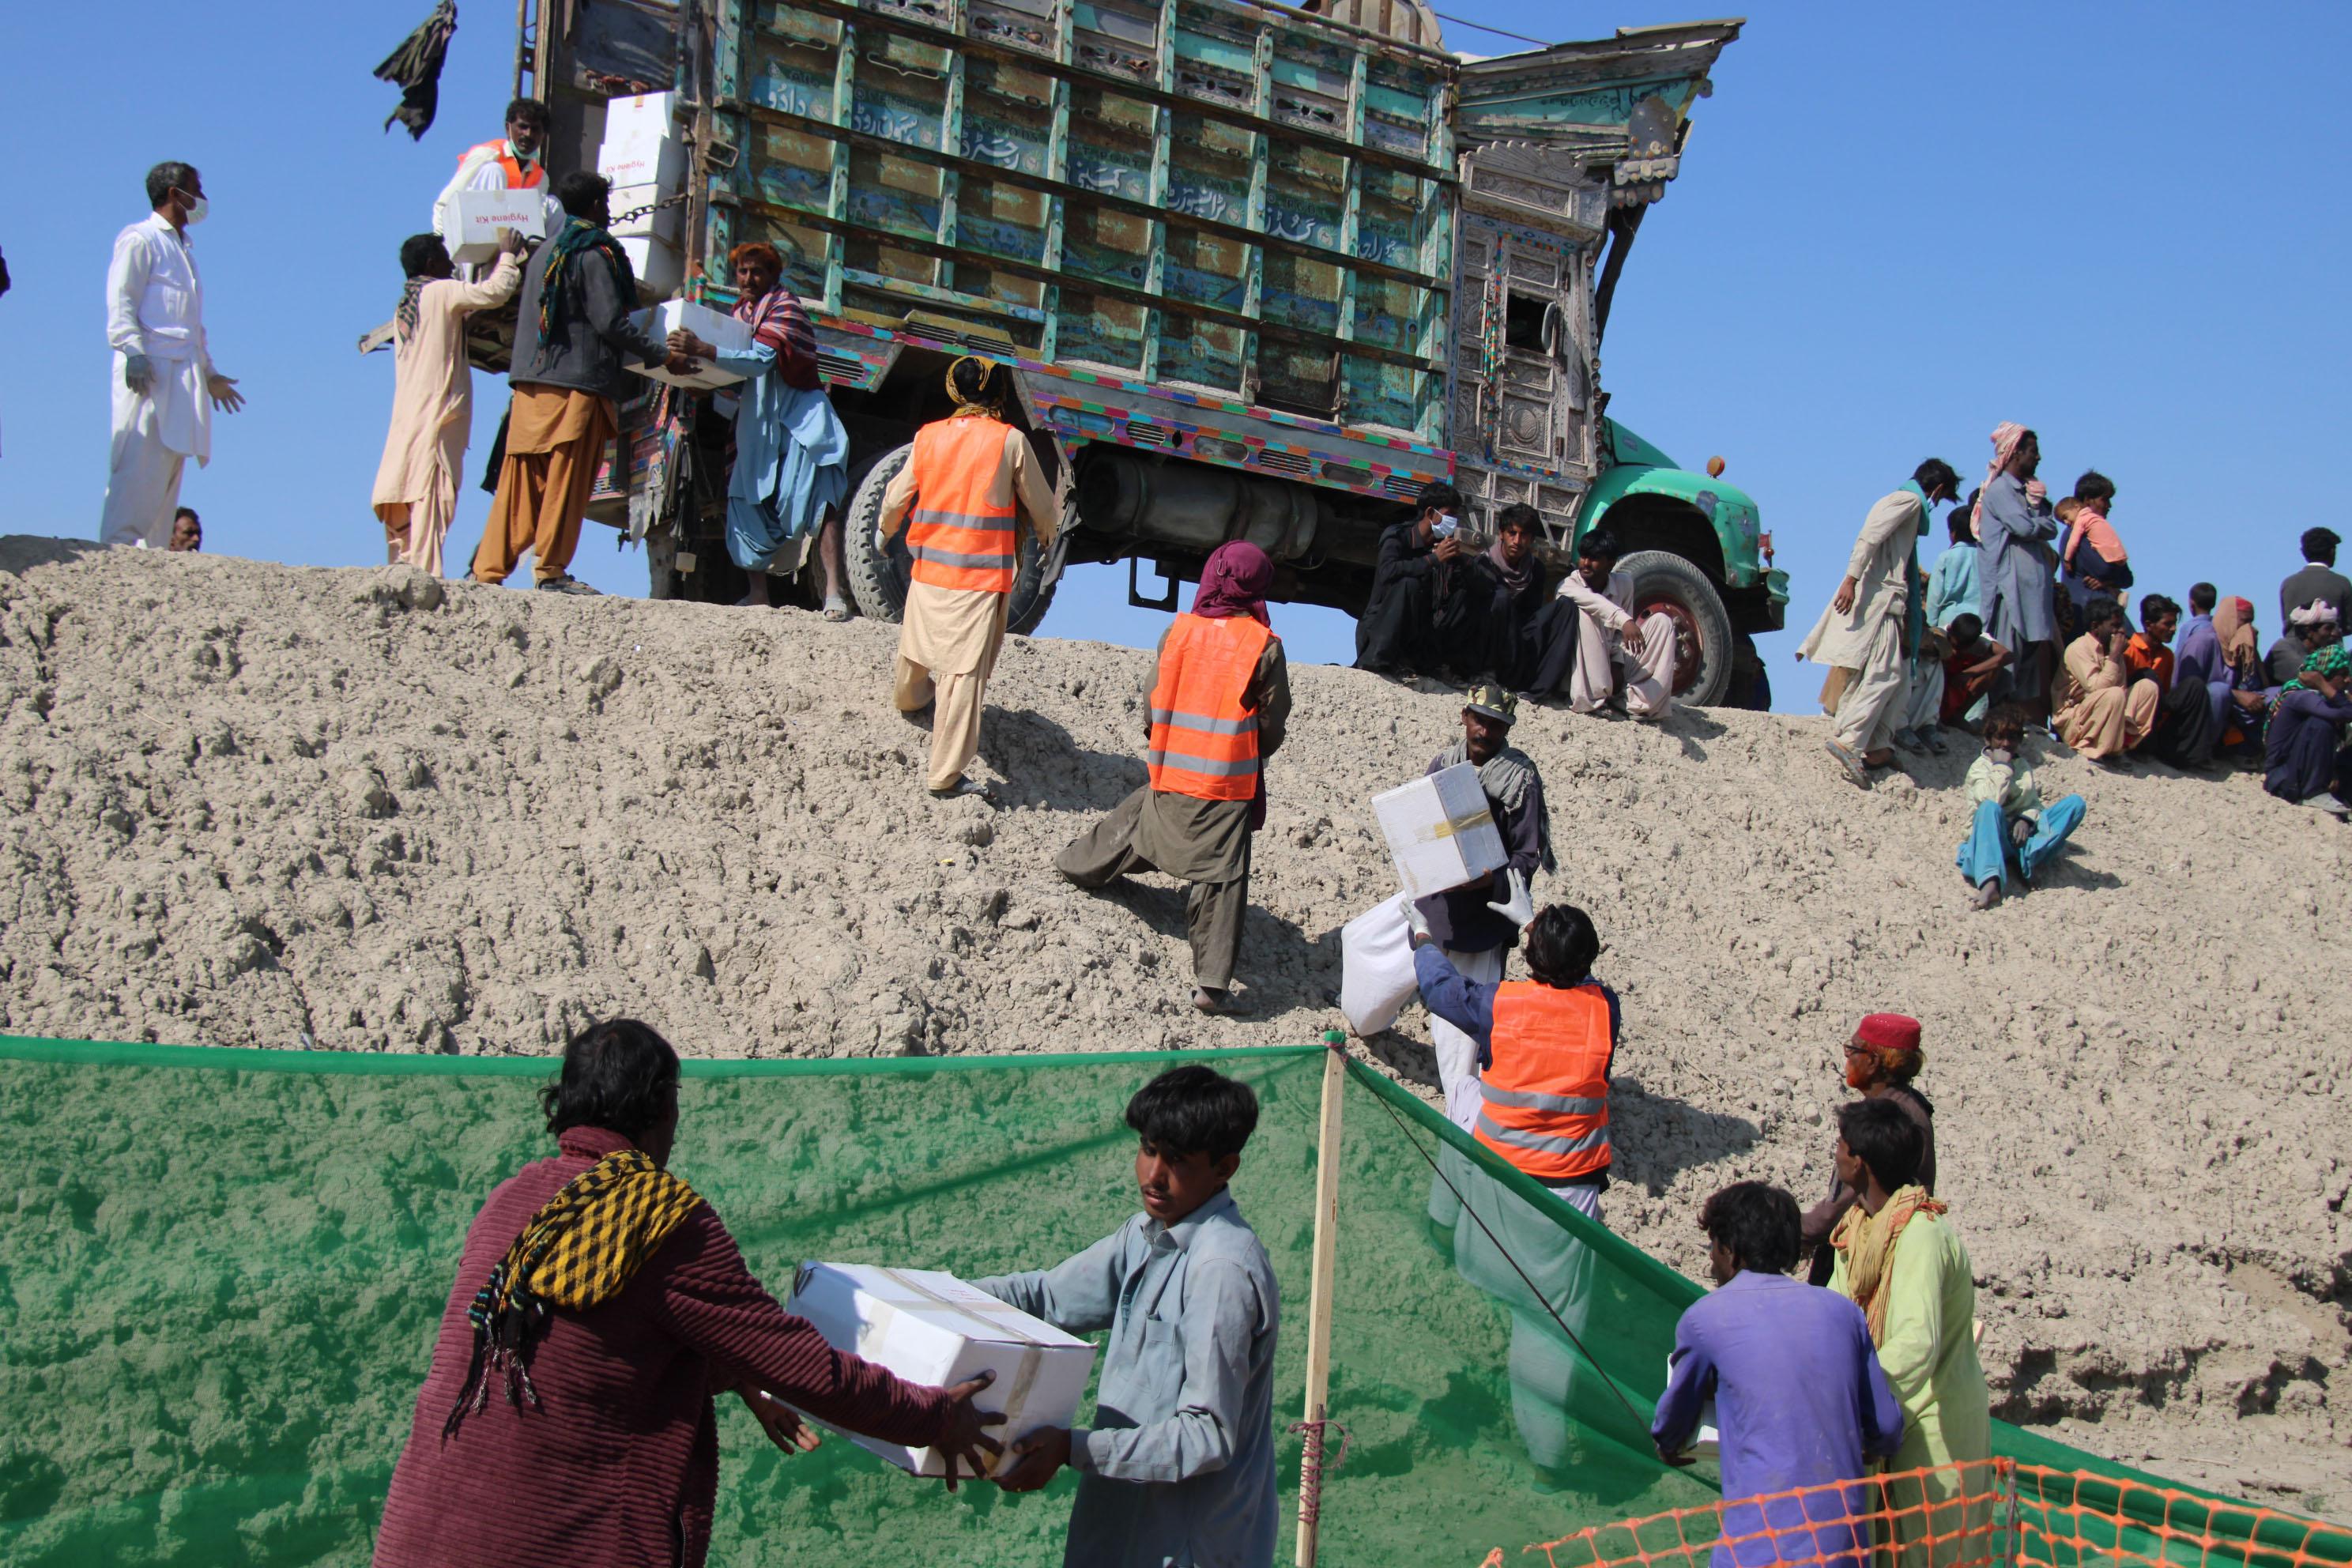 MSF staff distributing relief packages in the Dadu district, Pakistan